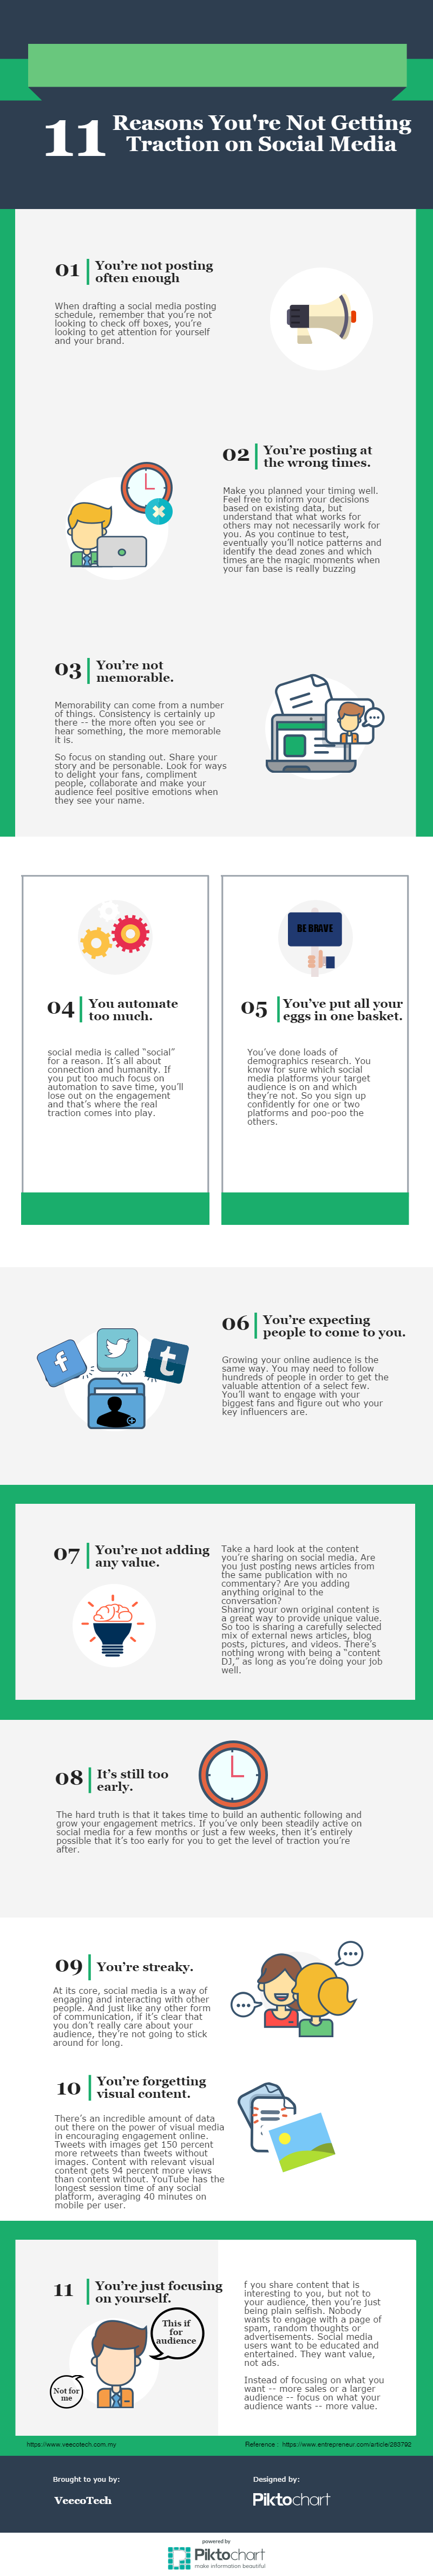 11-reasons-you're-not-getting-traction-in-social-media